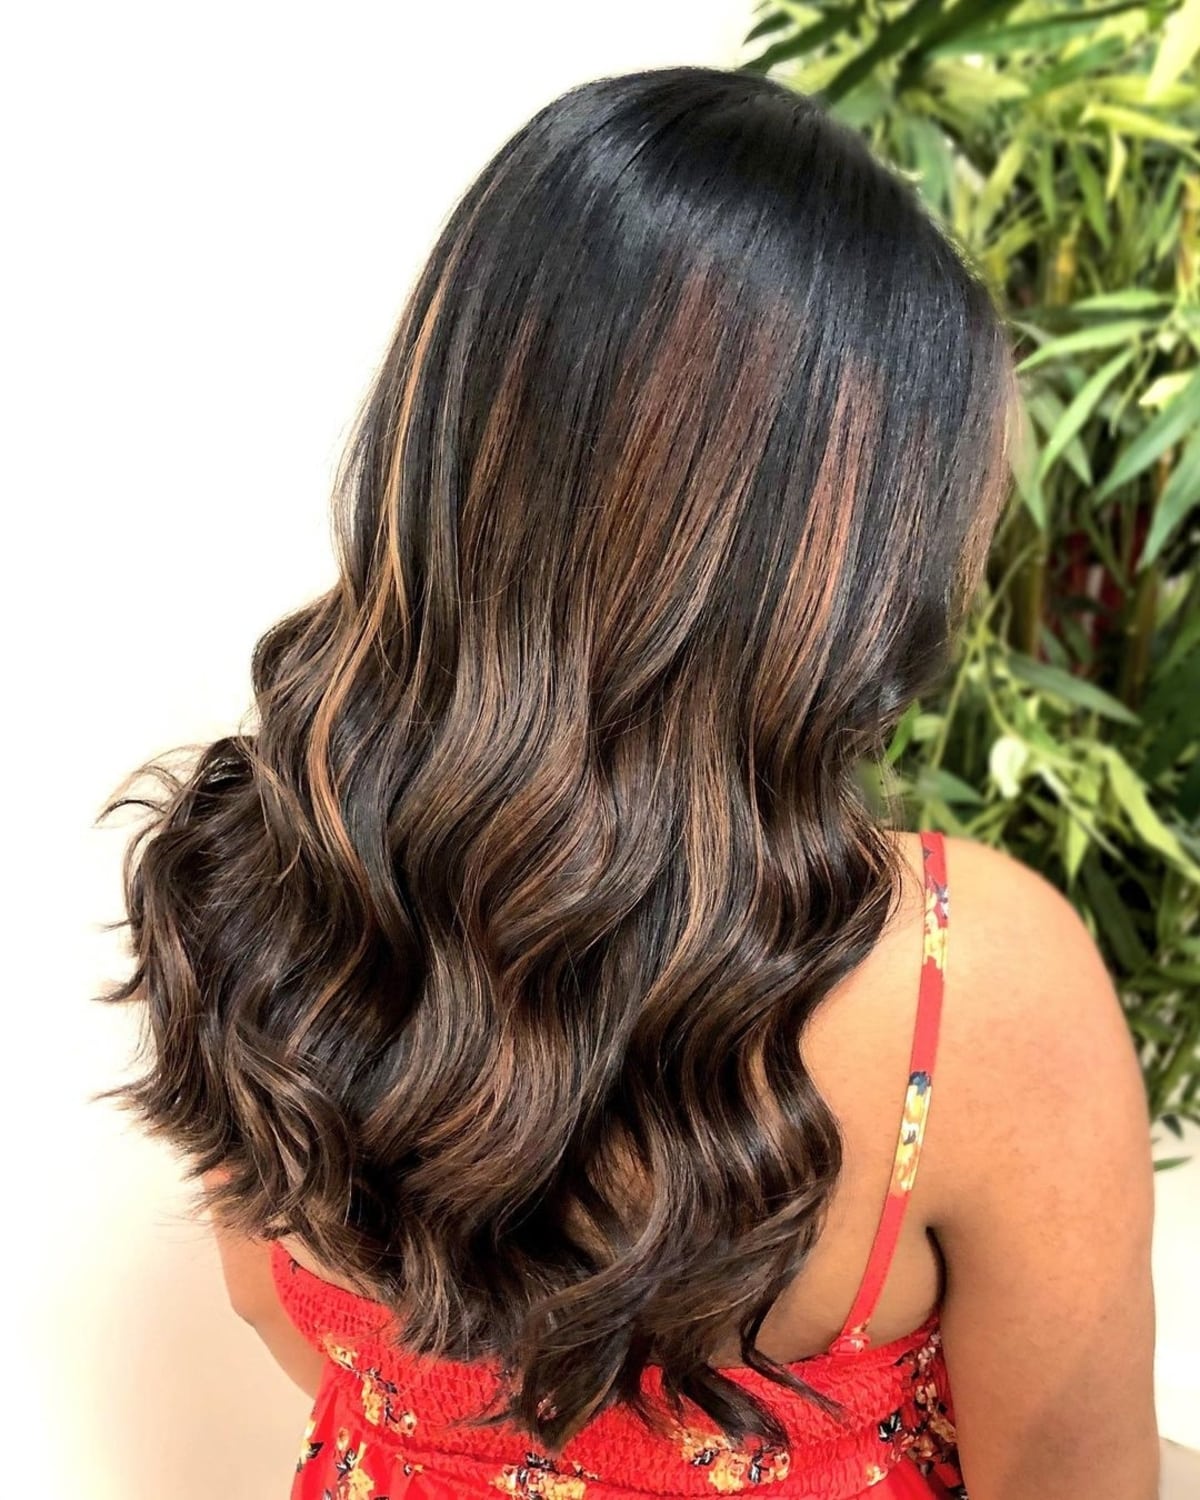 Contrasted Black Hair with Chestnut Highlights